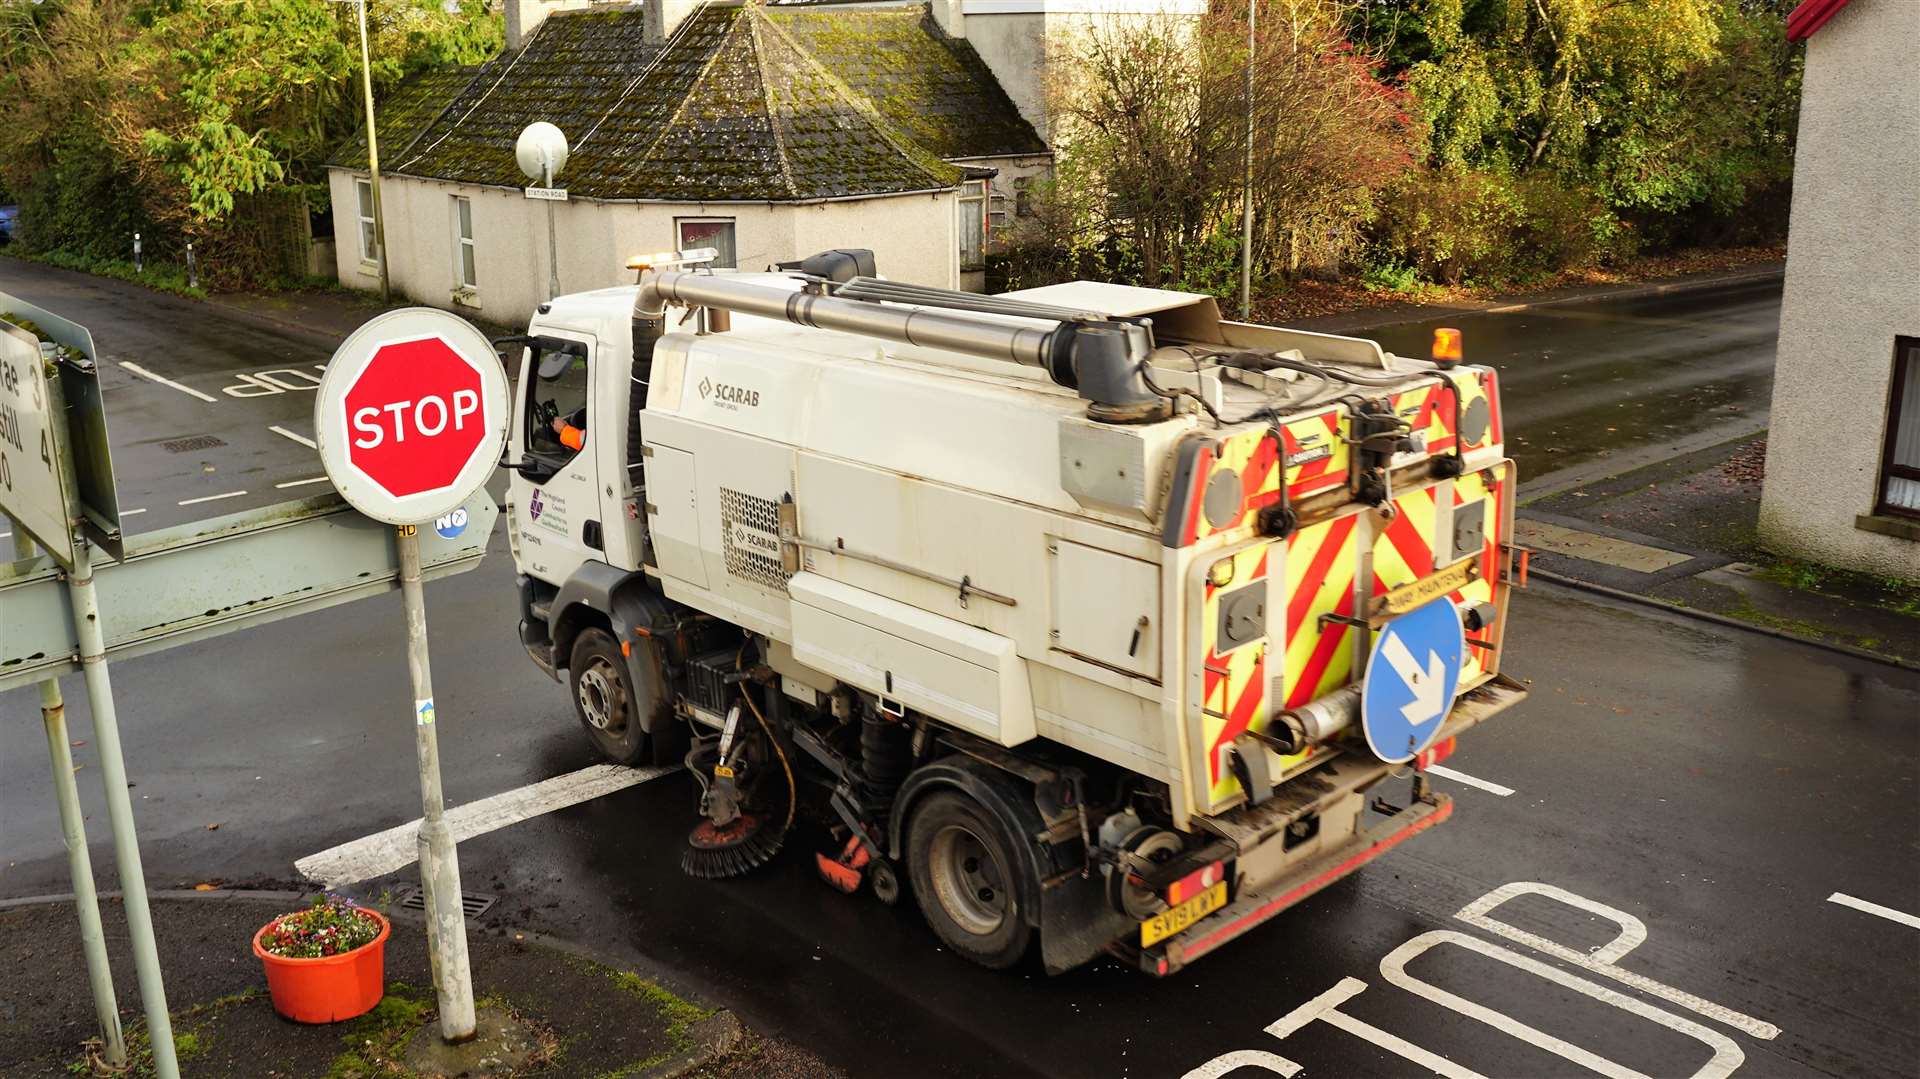 The Scarab truck-mounted sweeper spent at least two hours working its way through Watten. Picture: DGS